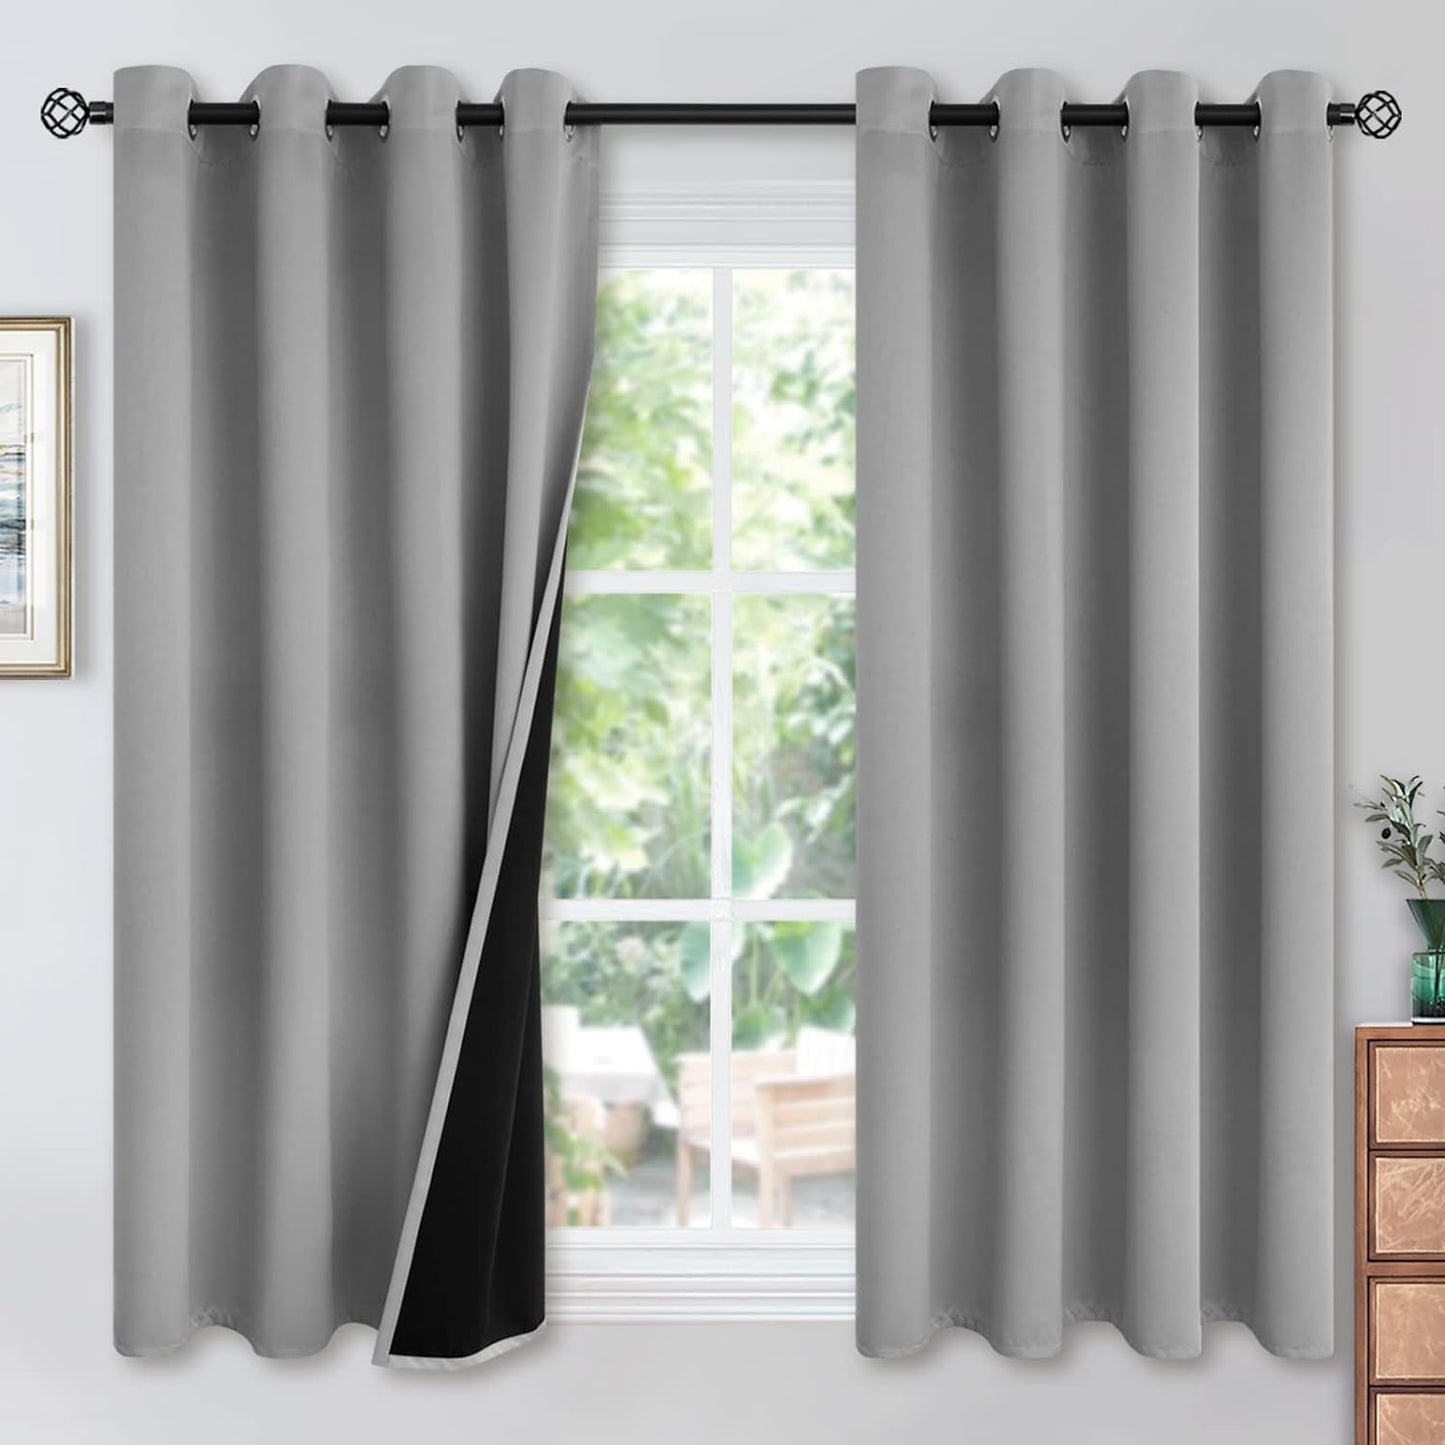 Youngstex Black 100% Blackout Curtains 63 Inches for Bedroom Thermal Insulated Total Room Darkening Curtains for Living Room Window with Black Back Grommet, 2 Panels, 42 X 63 Inch  YoungsTex Light Grey 52W X 45L 